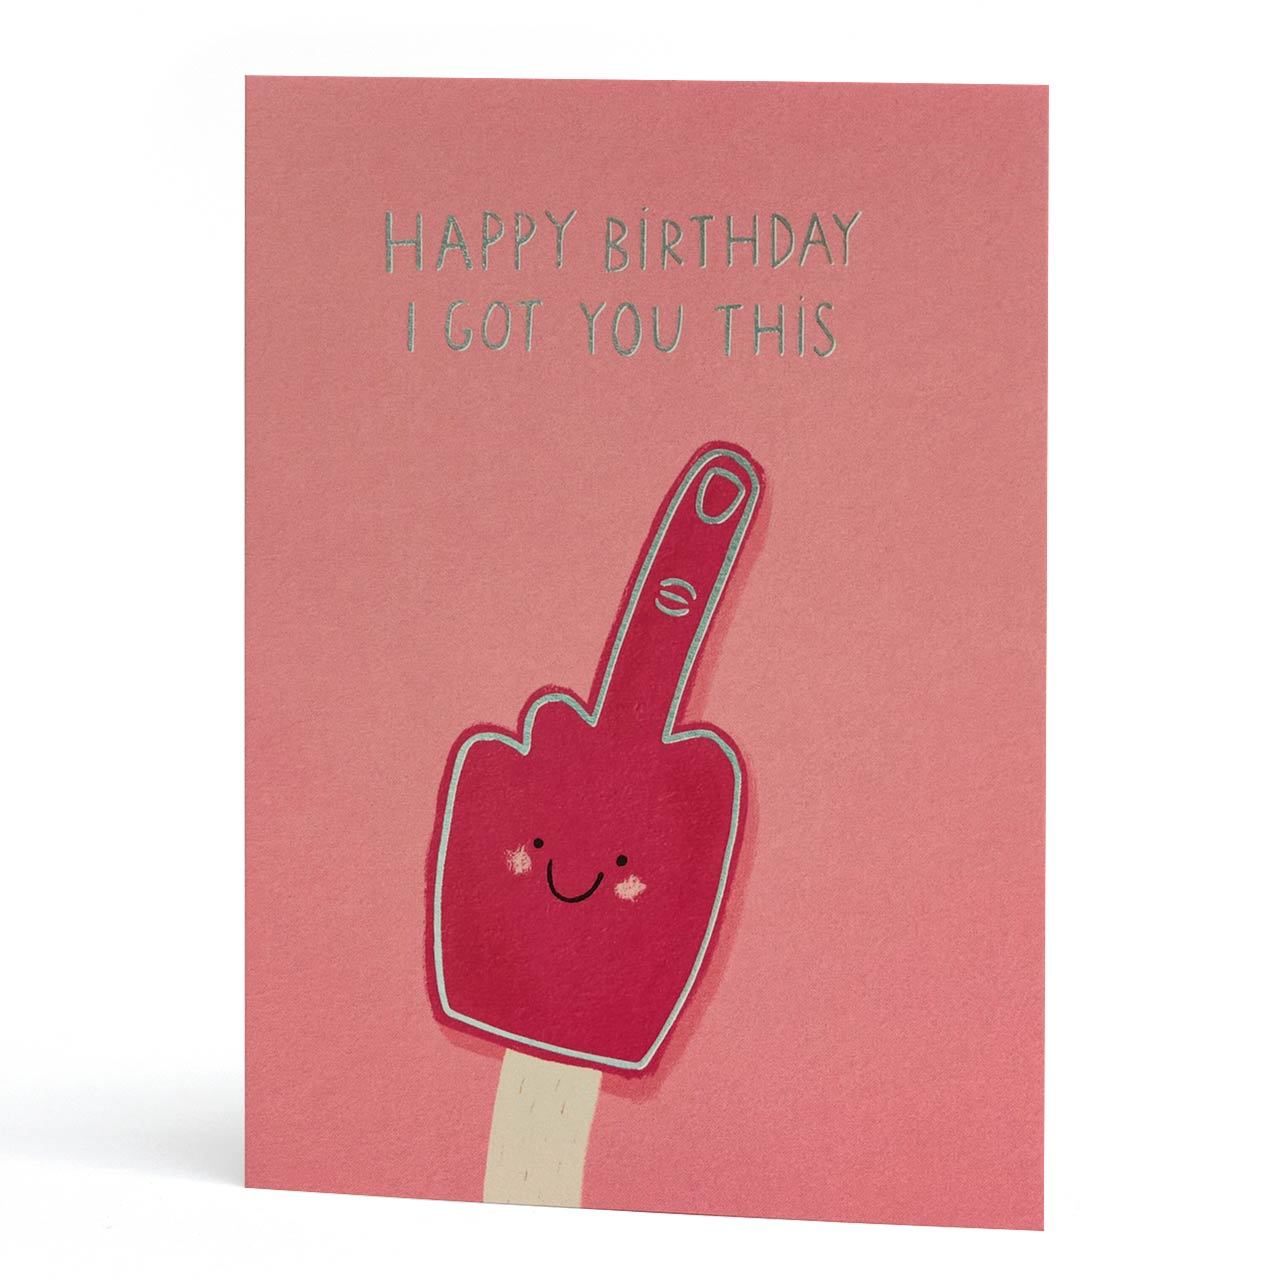 Got You This Silver Foil Birthday Greeting Card